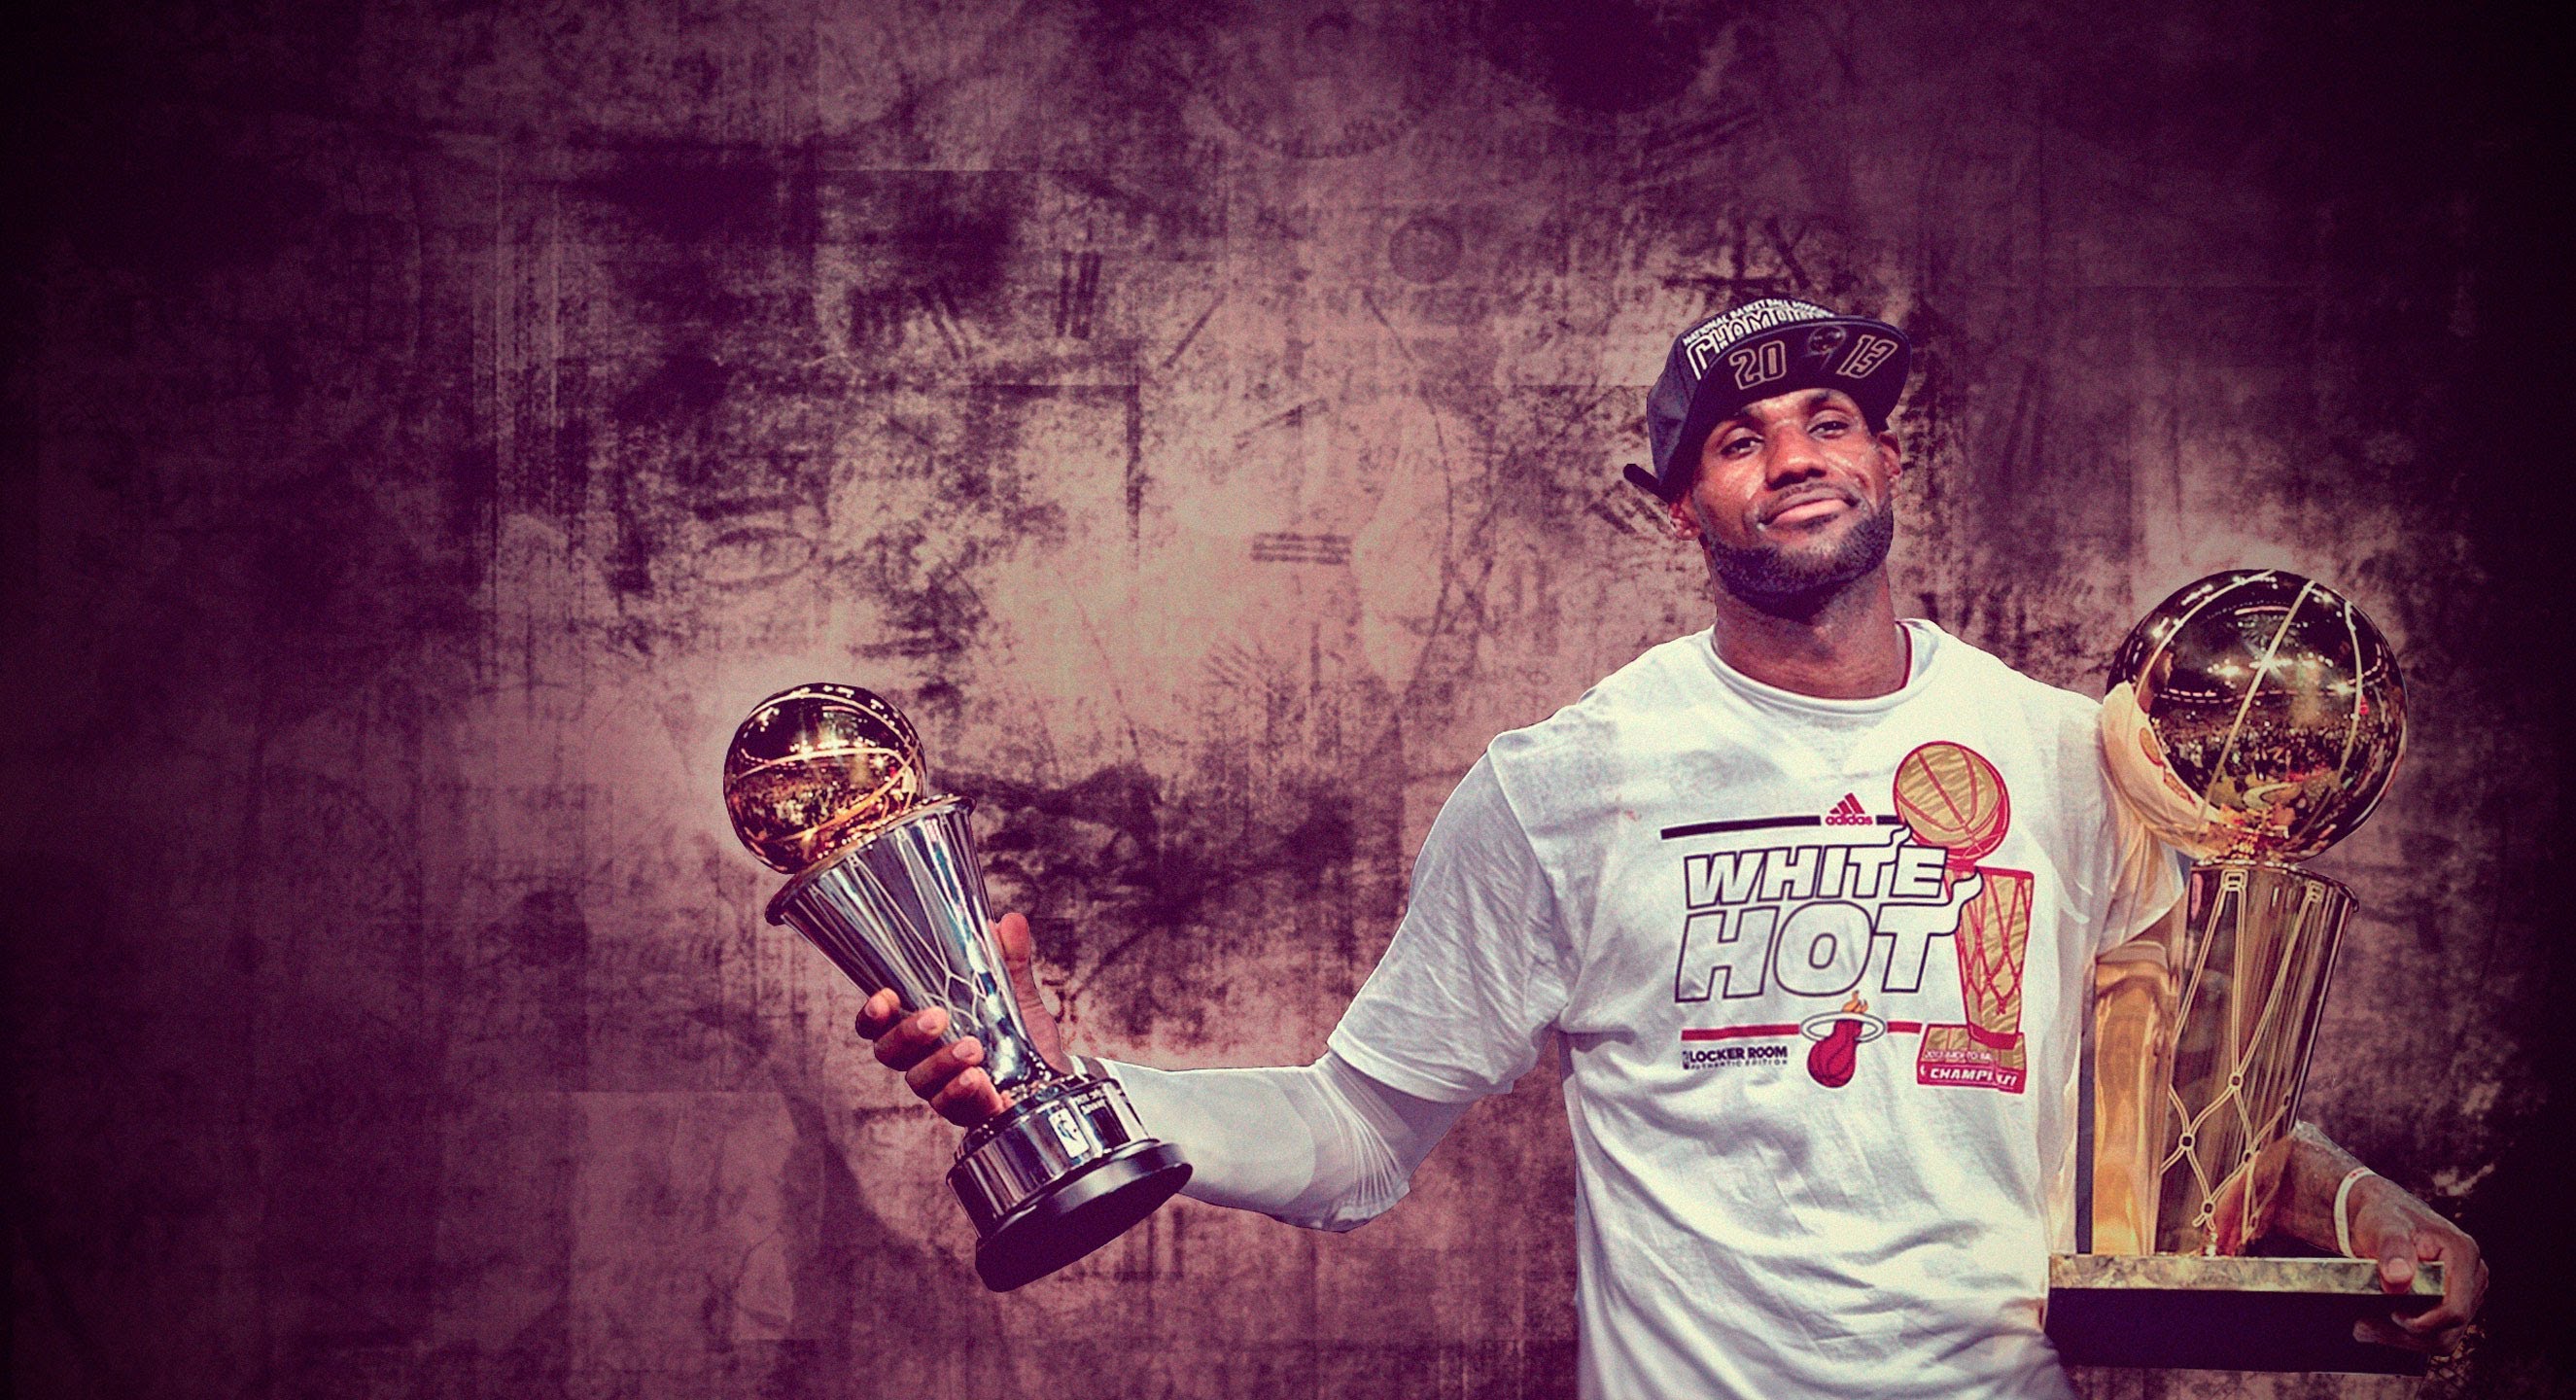 Lebron James HD Wallpaper For Desktop In High Resolution At Sports